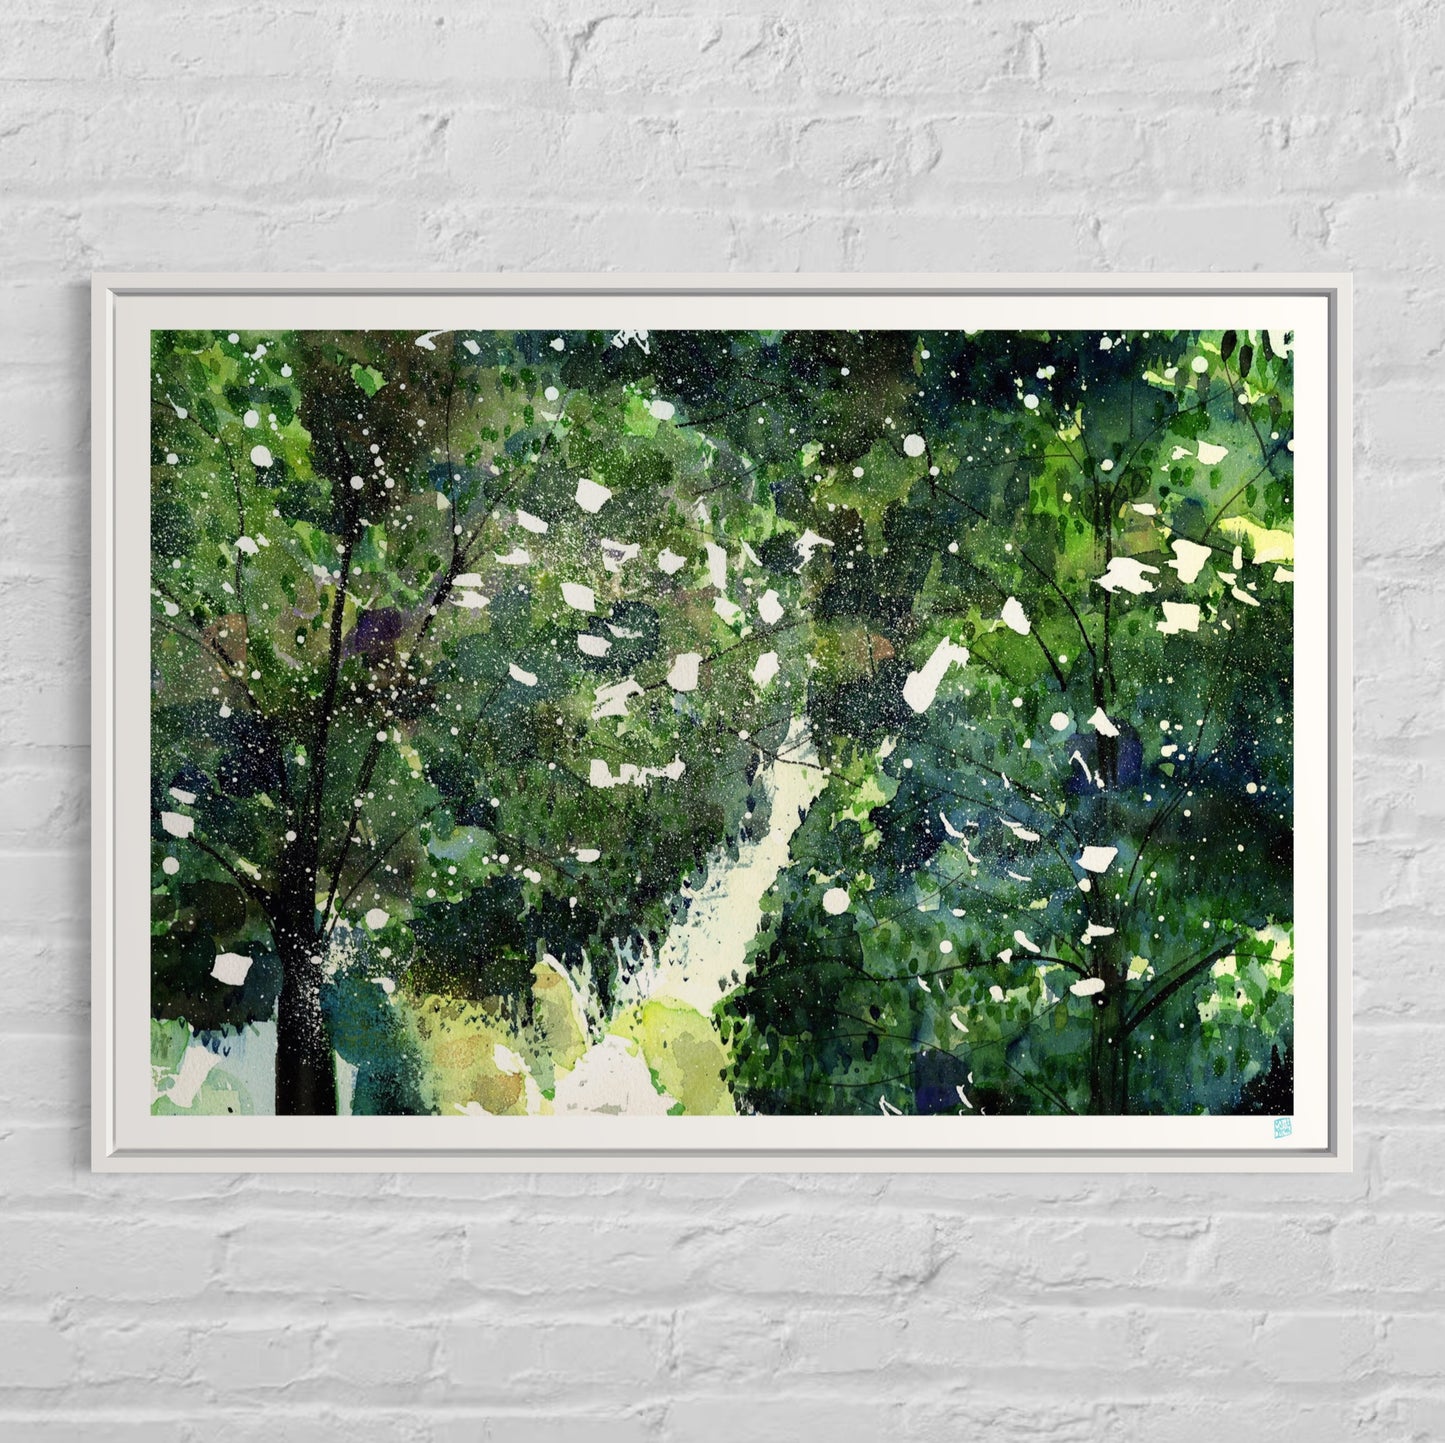 Limited Edition Print - Shade and the Light